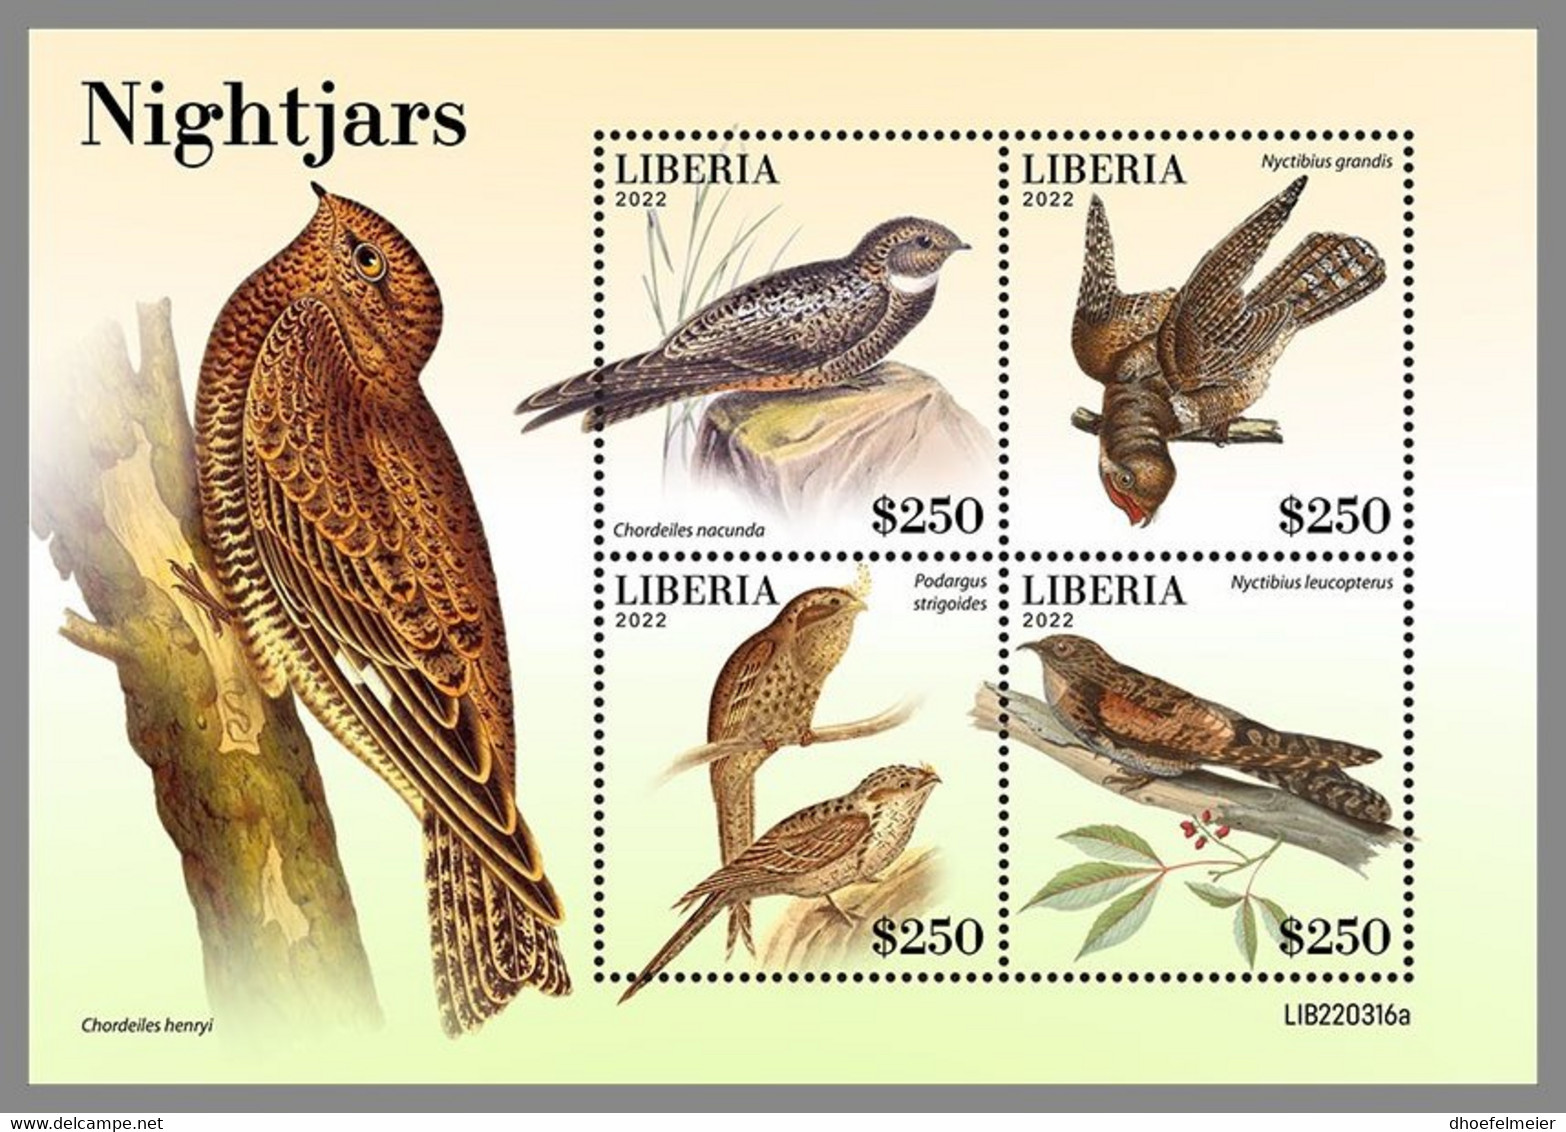 LIBERIA 2022 MNH Nightjars Nachtschwalben Engoulevents M/S - OFFICIAL ISSUE - DHQ2249 - Swallows